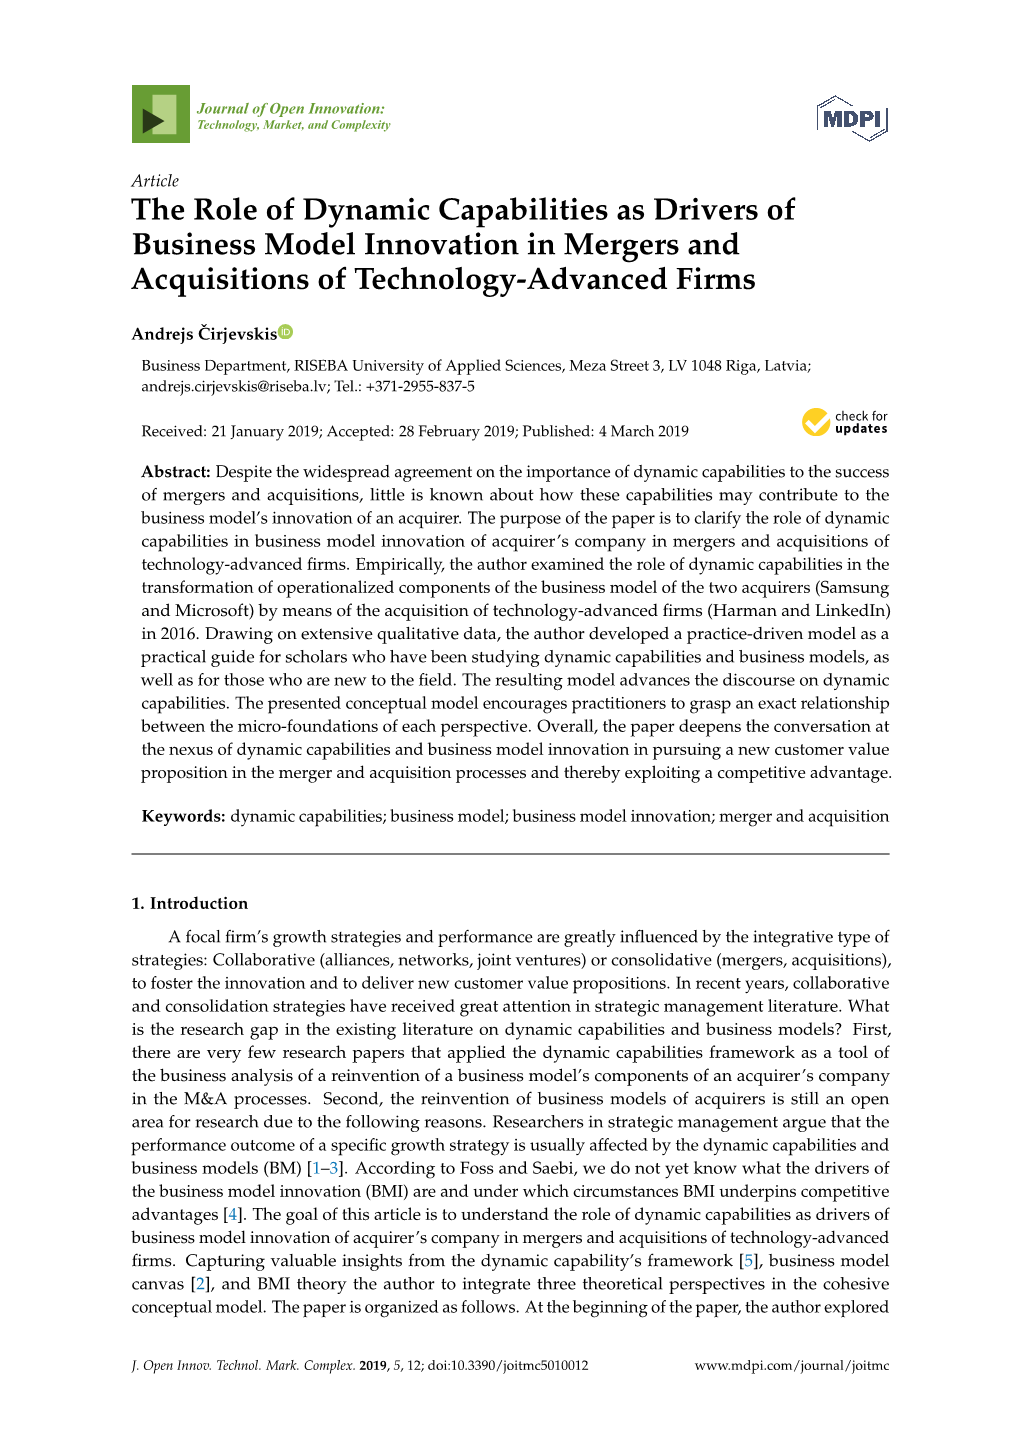 The Role of Dynamic Capabilities As Drivers of Business Model Innovation in Mergers and Acquisitions of Technology-Advanced Firms